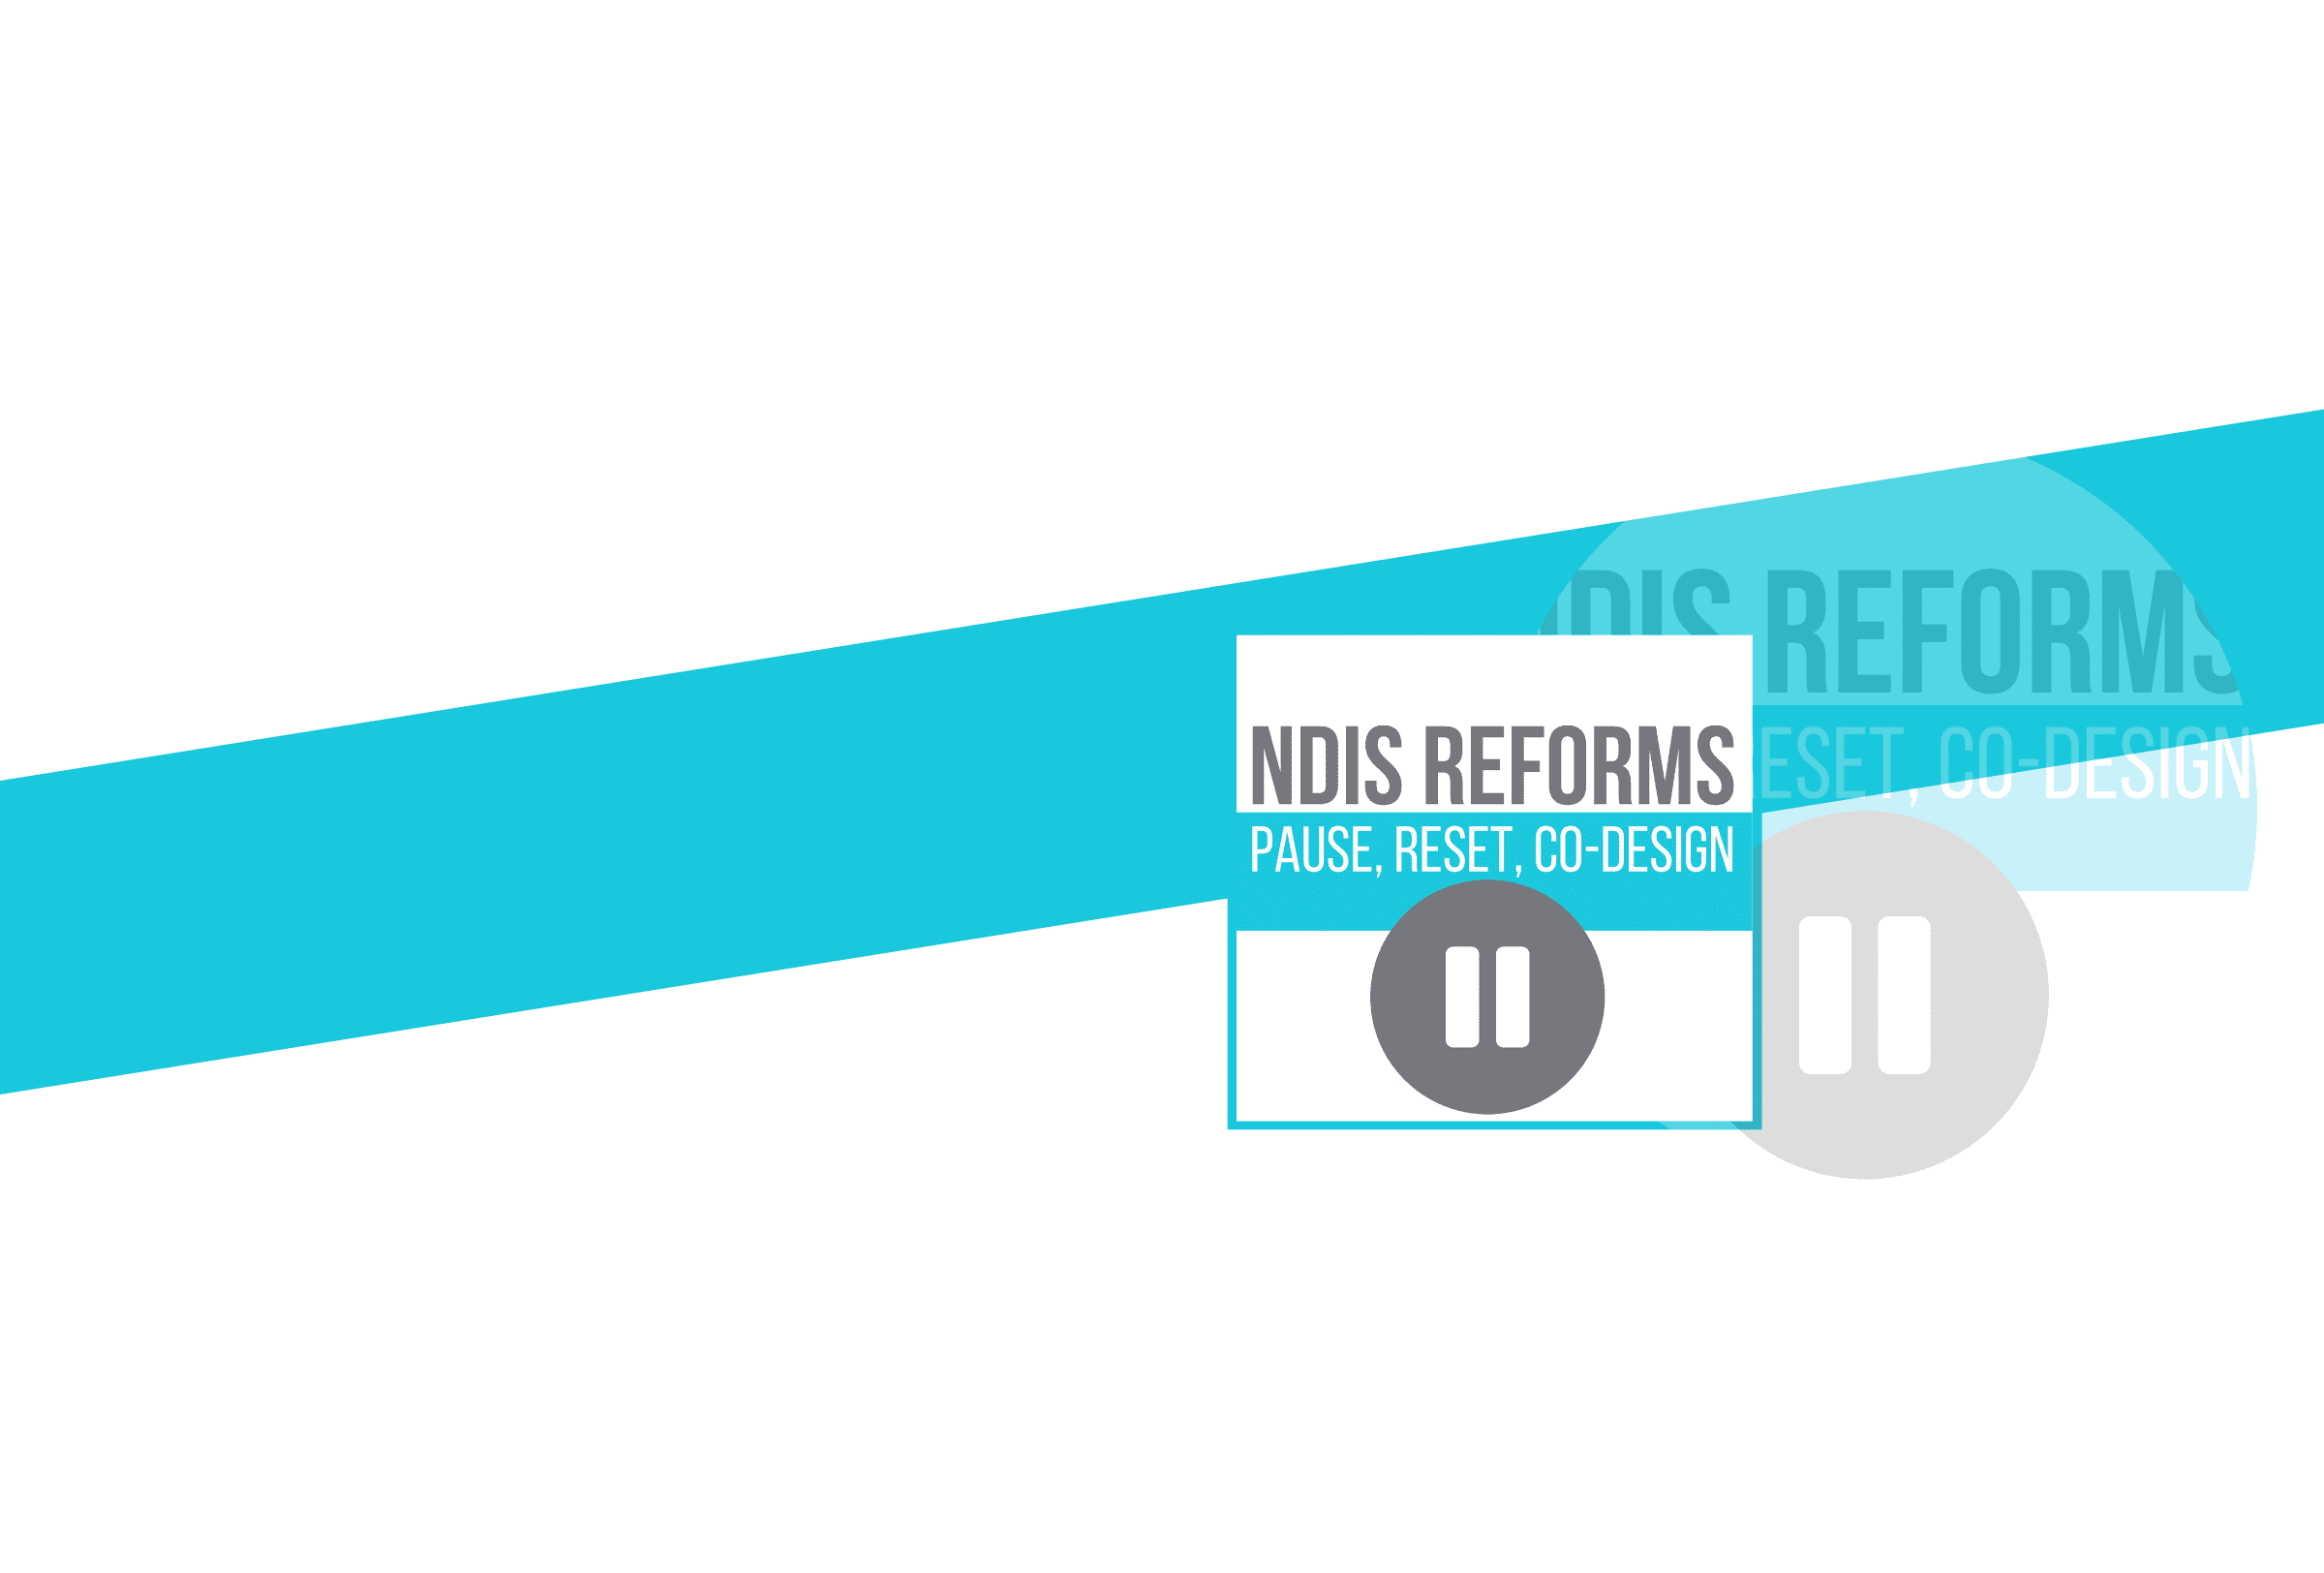 Aqua strip across and then a Square with NDIS REFORMS, Pause, Reset, Co-Design and a pause symbol in grey below the text.